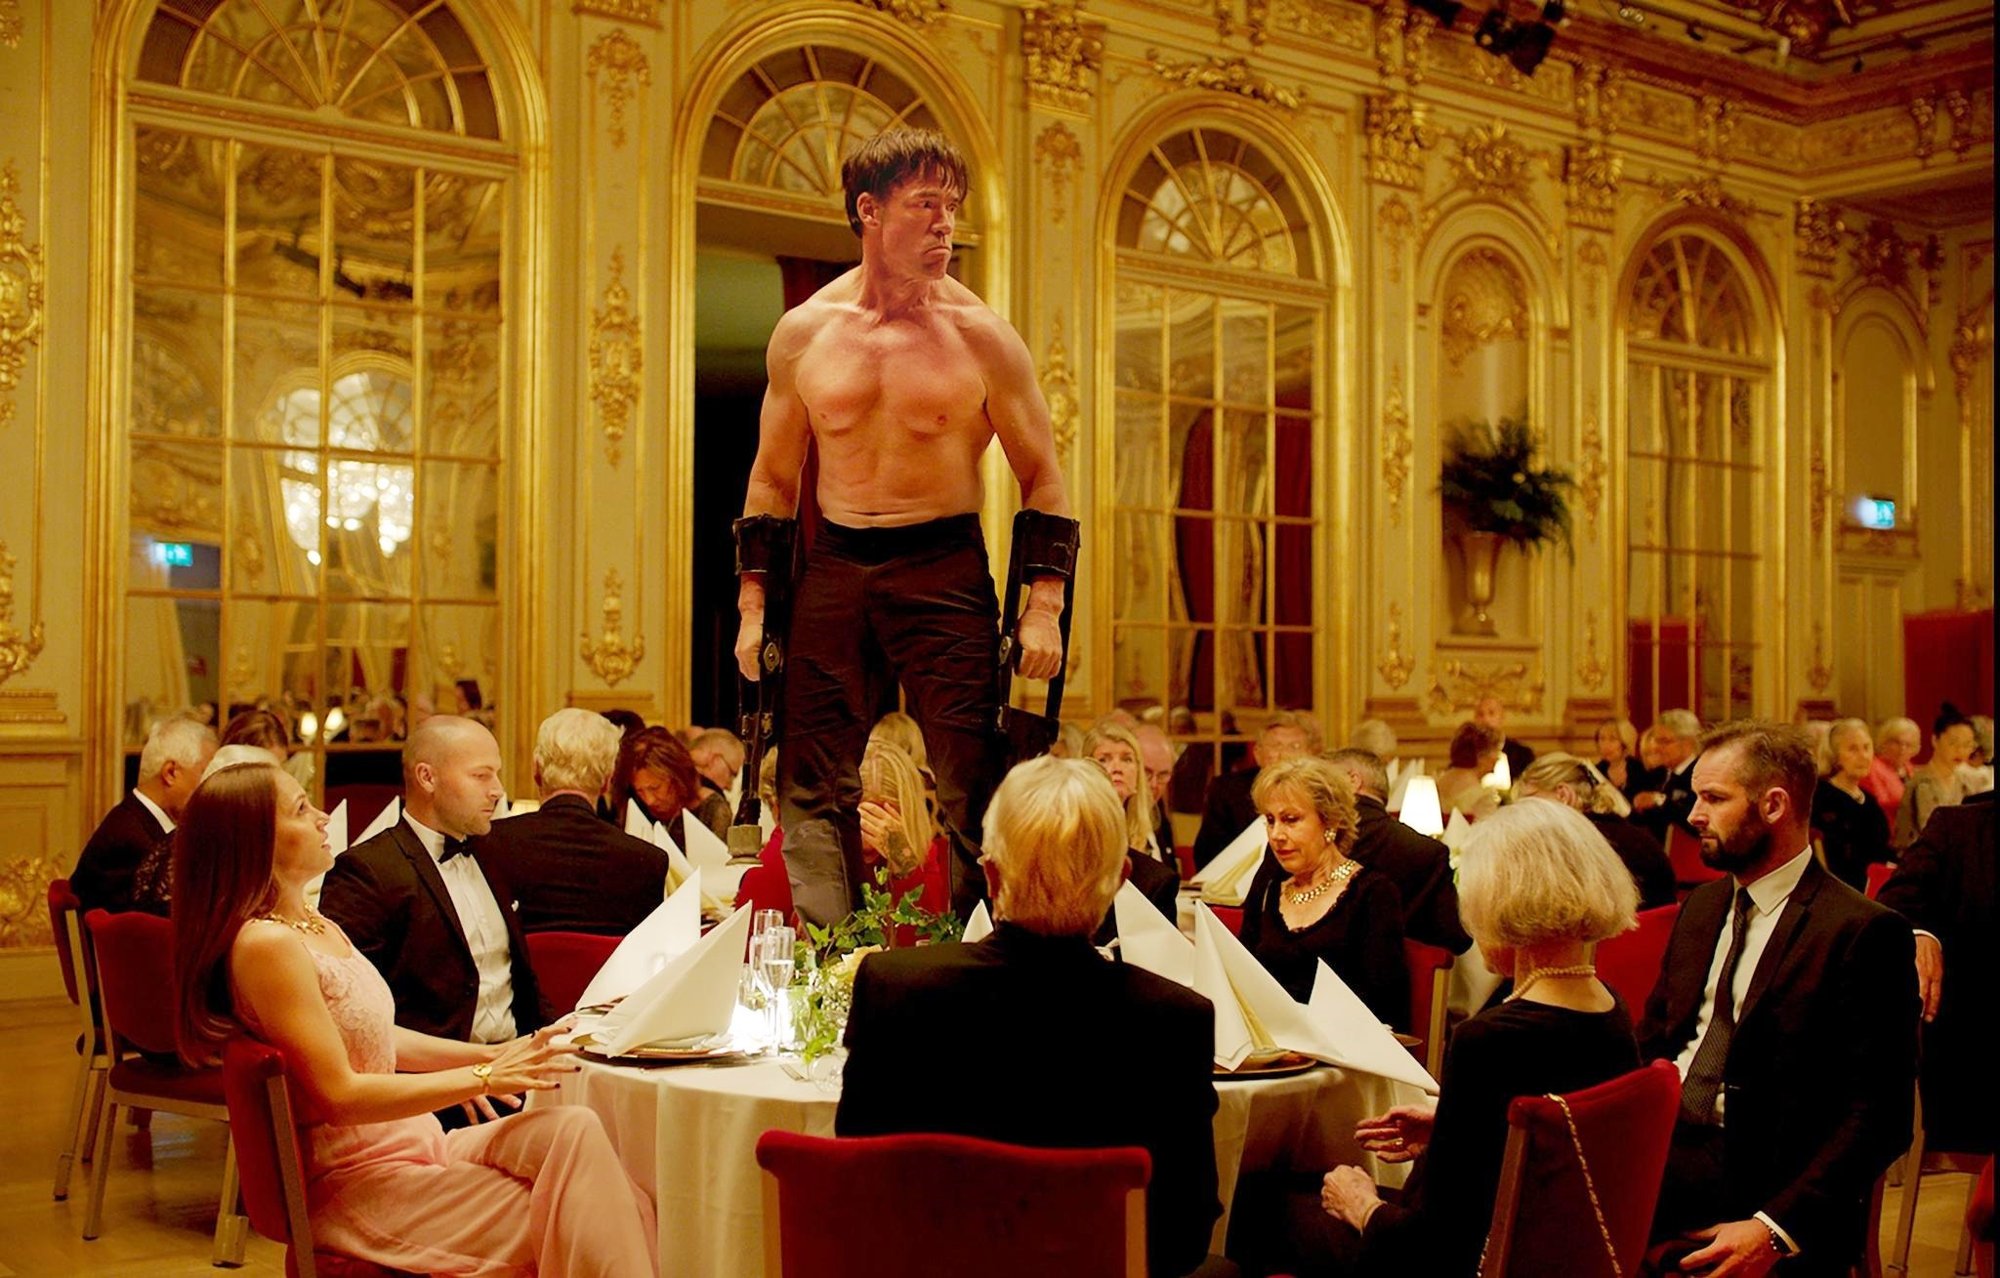 Terry Notary stars as Oleg in Magnolia Pictures' The Square (2017)